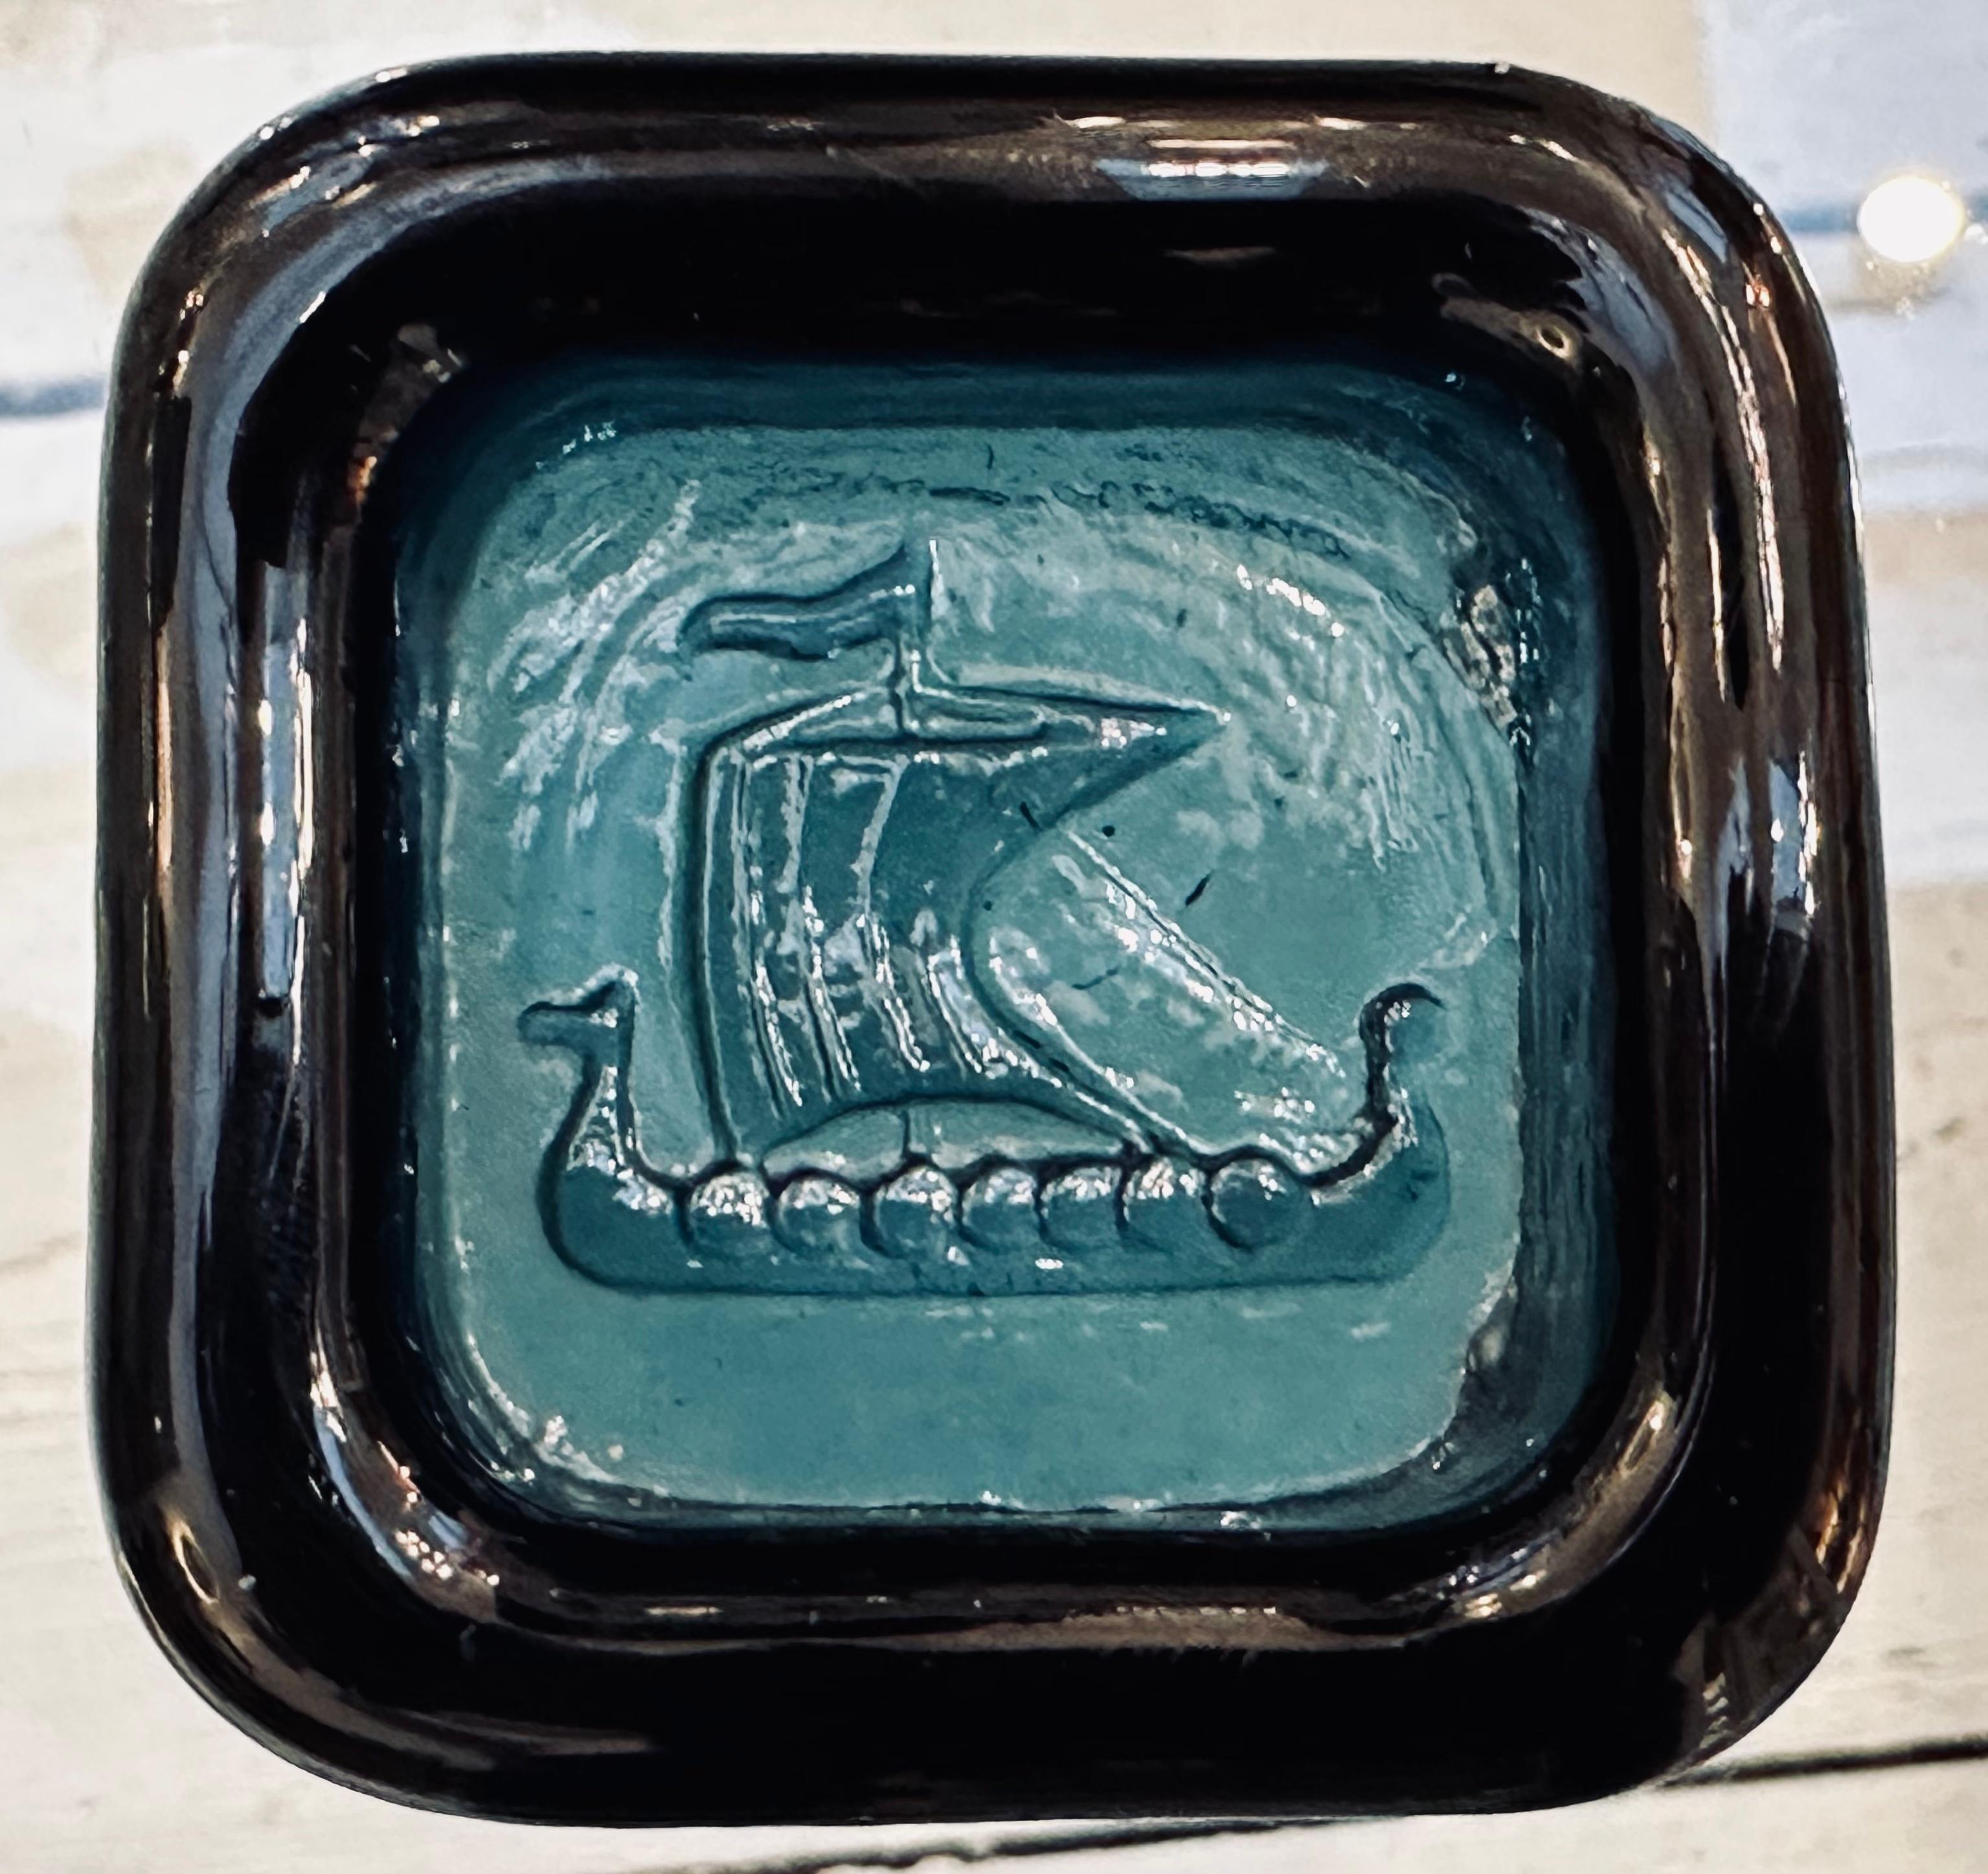 1960s Small Swedish paperweight, ashtray or trinket dish which is made from a thick piece of square coloured dark teal glass. The viking ship design is pressed into the base of the glass to form the indented dish shape. The dish was designed by Erik